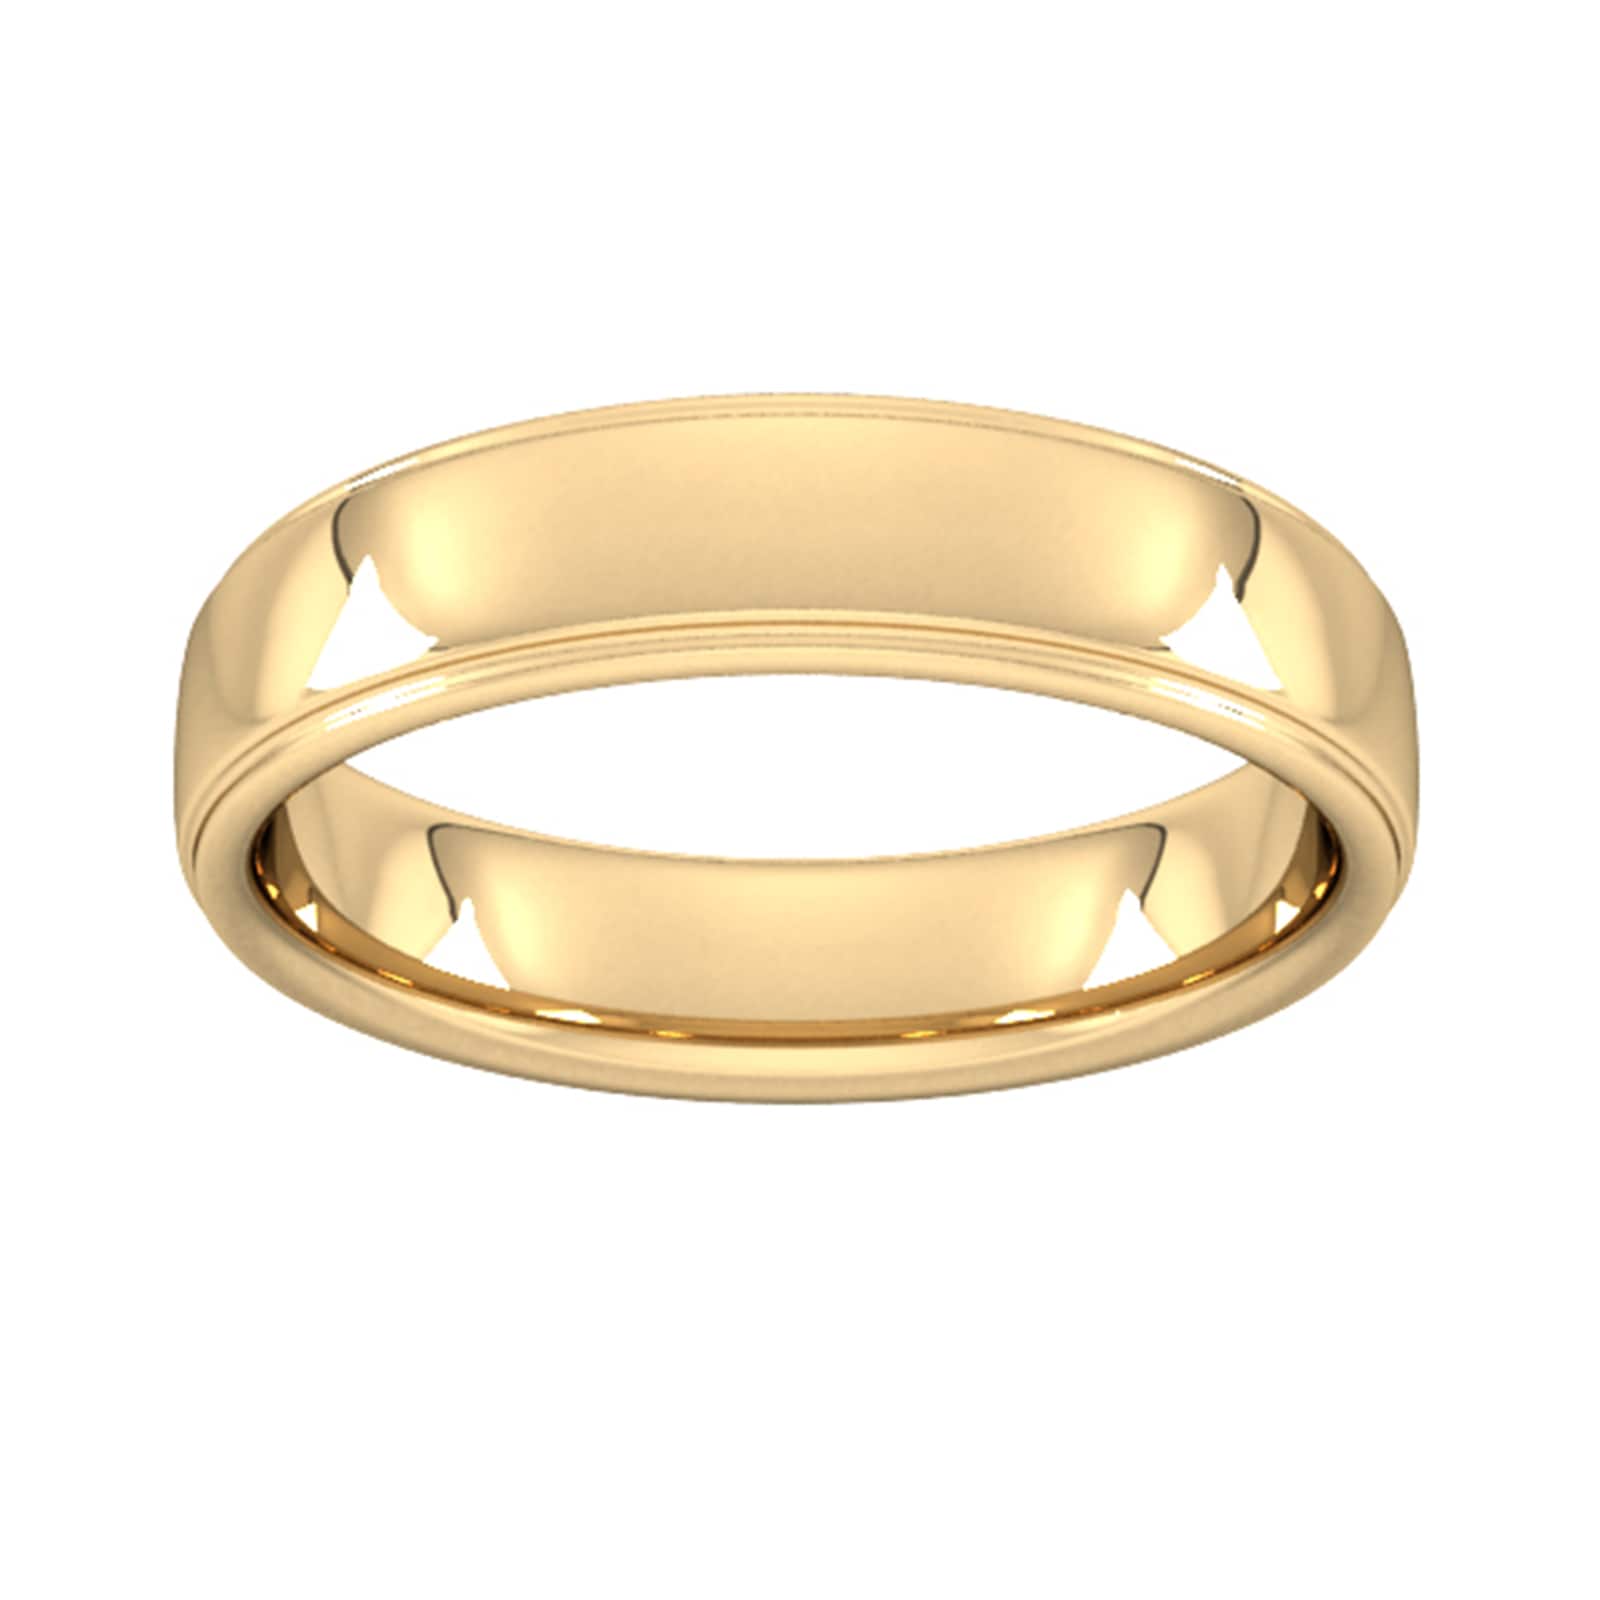 5mm Slight Court Heavy Polished Finish With Grooves Wedding Ring In 9 Carat Yellow Gold - Ring Size T